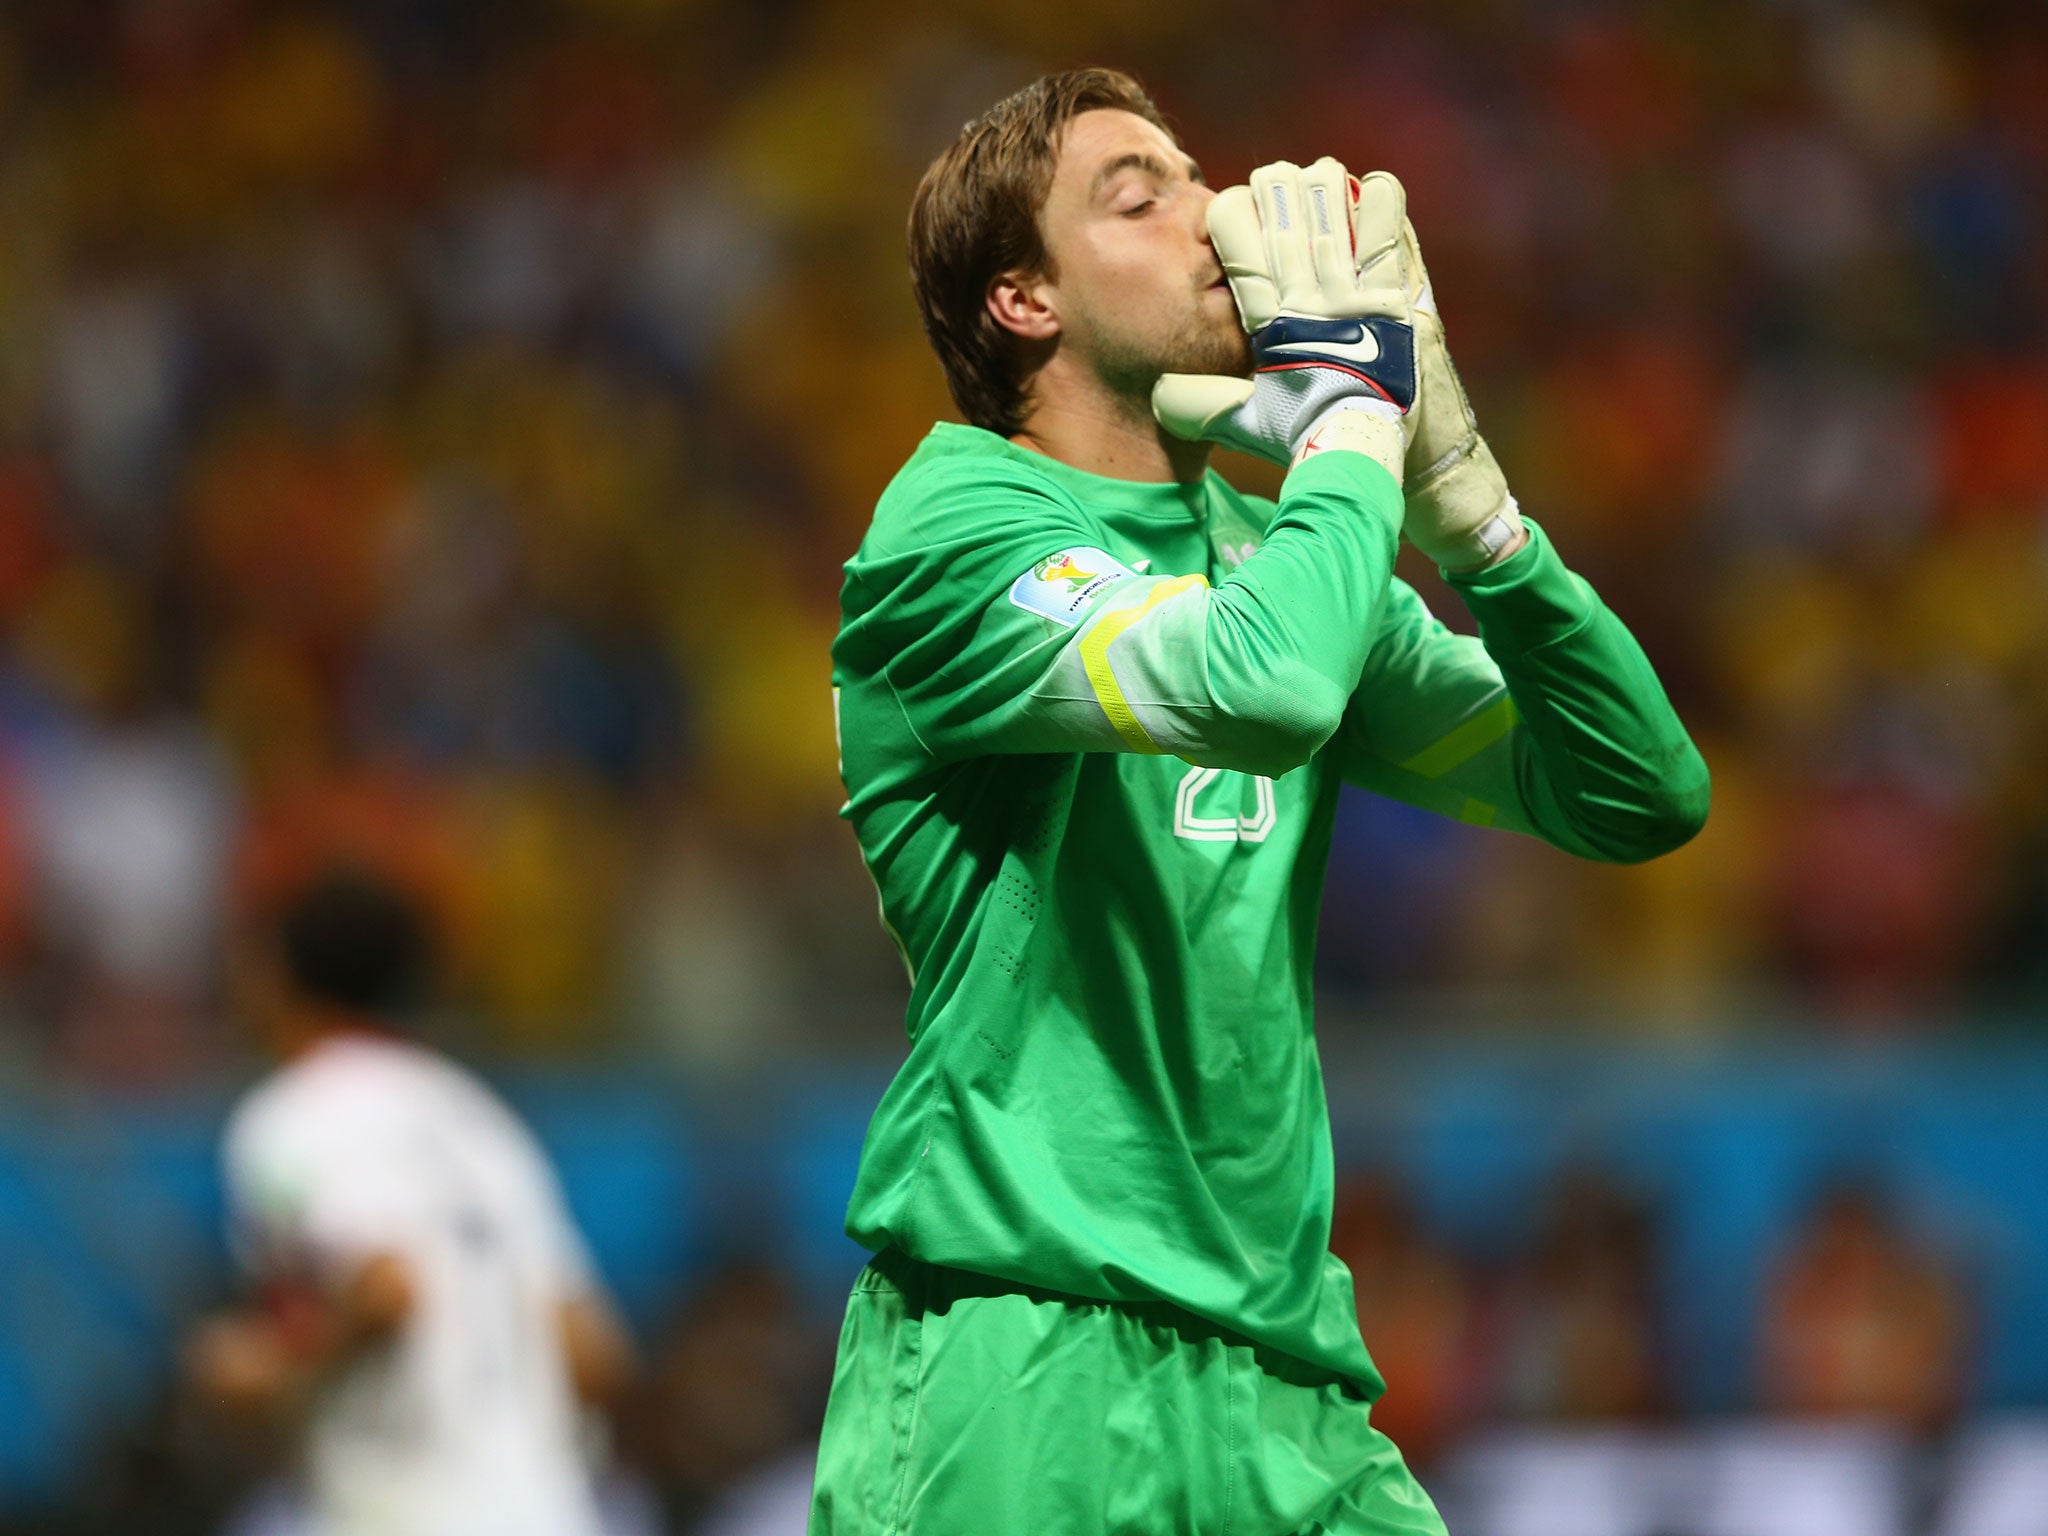 Netherlands' substitute goalkeeper Tim Krul celebrates after saving two penalties in the shootout victory over Costa Rica